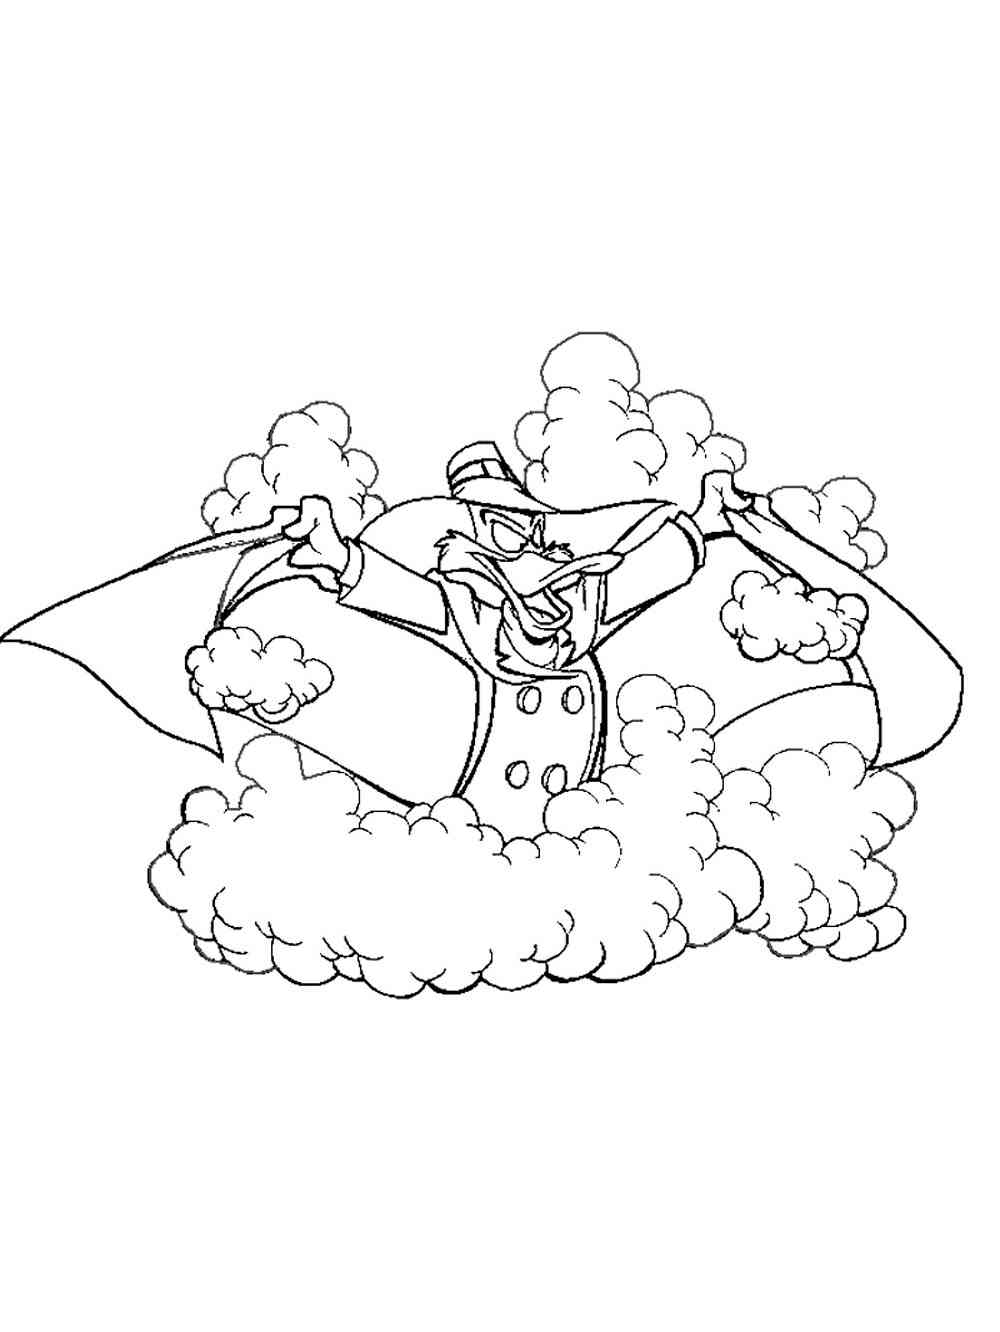 Darkwing Duck 17 coloring page